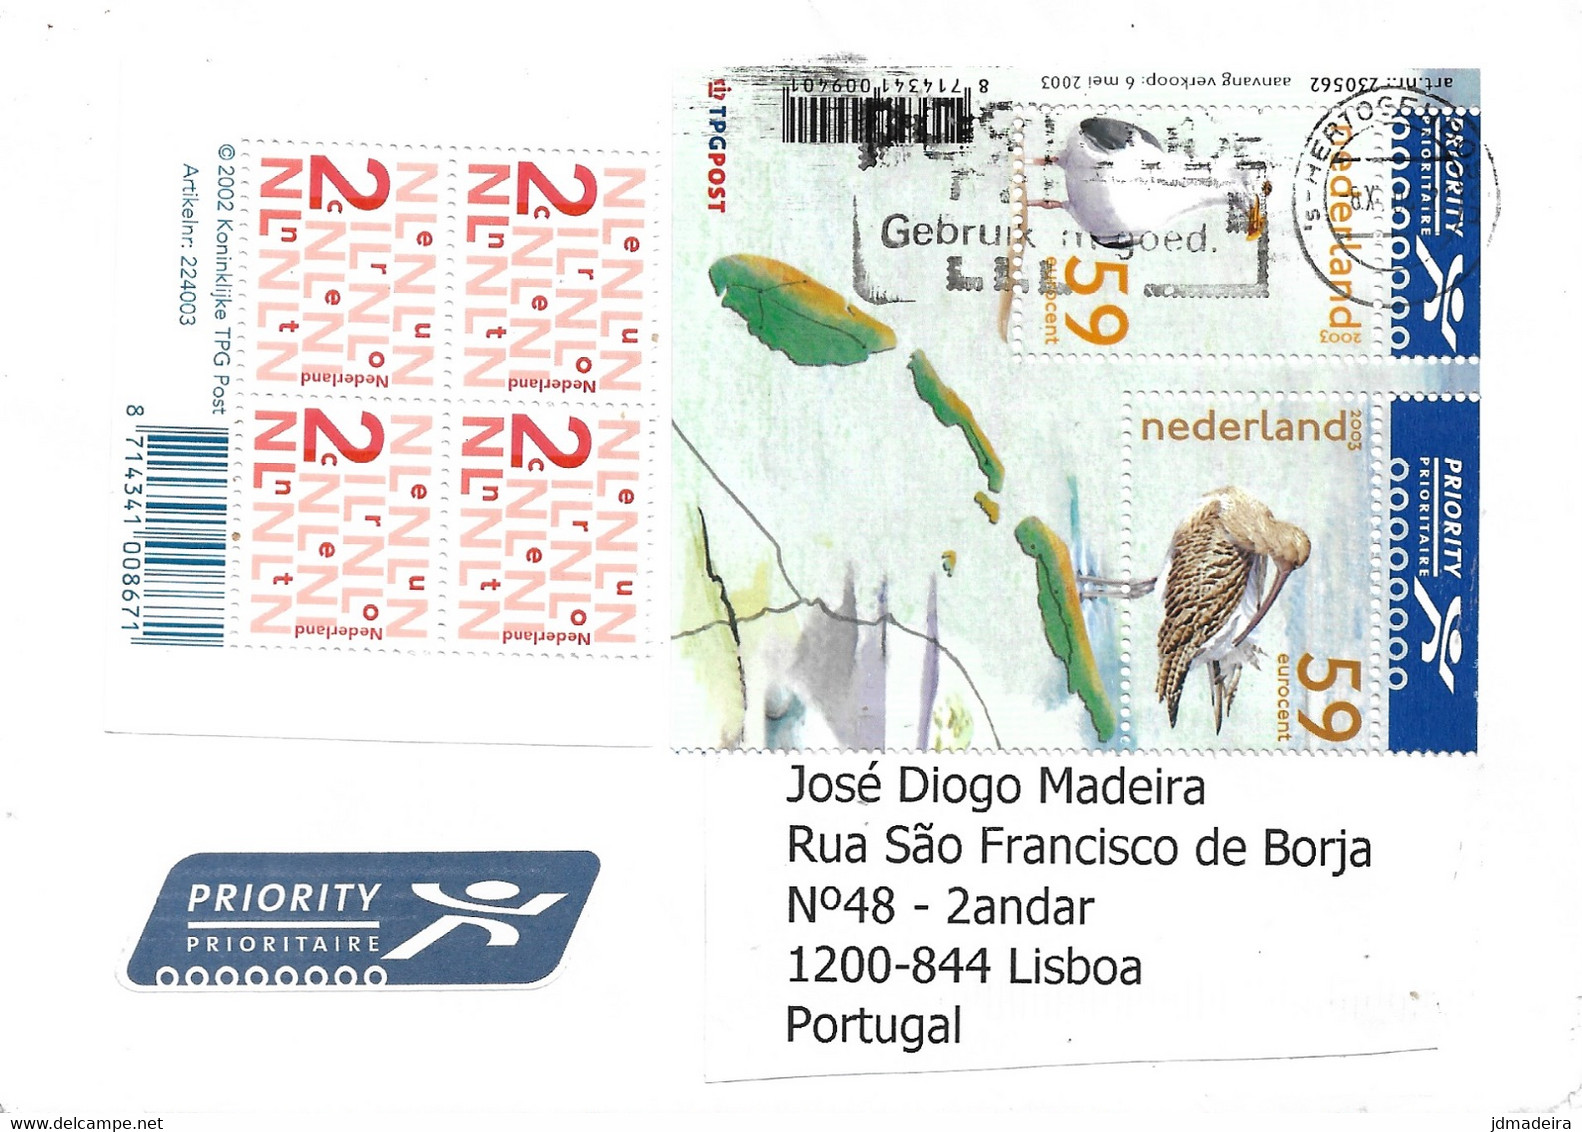 Netherlands Cover To Portugal - Covers & Documents